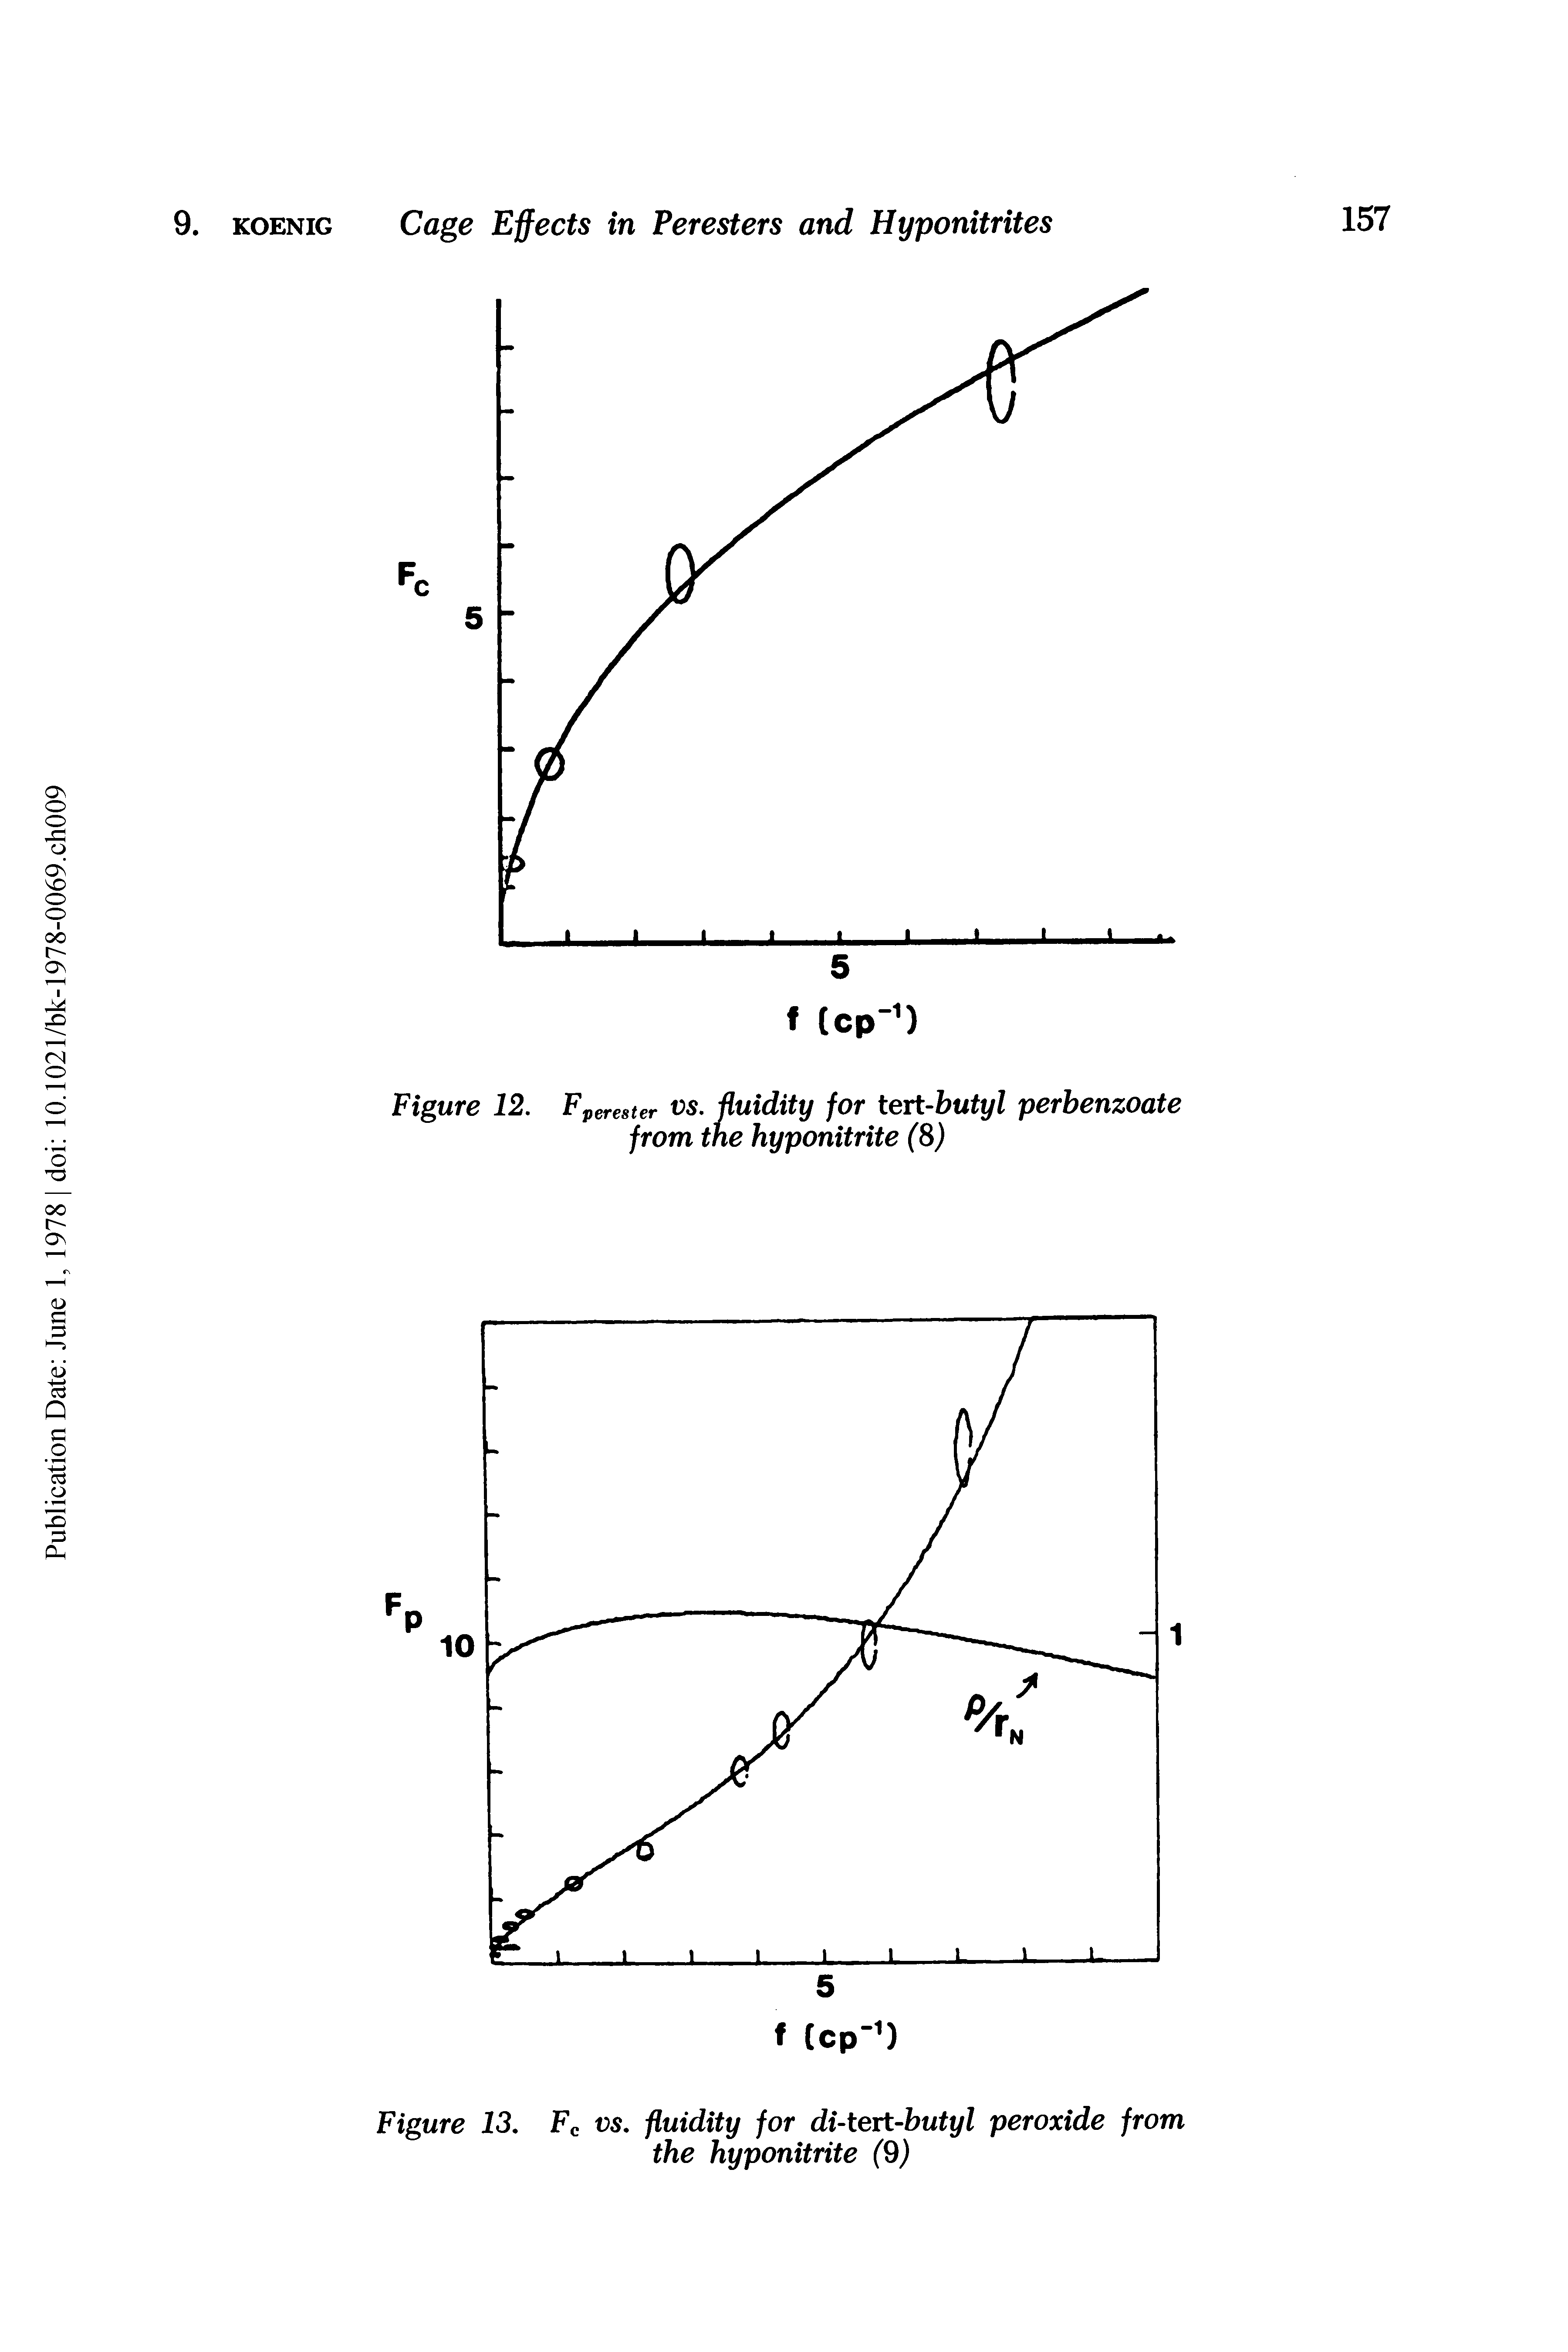 Figure 13. Fc vs. fluidity for di-tert-butyl peroxide from the hyponitrite (9)...